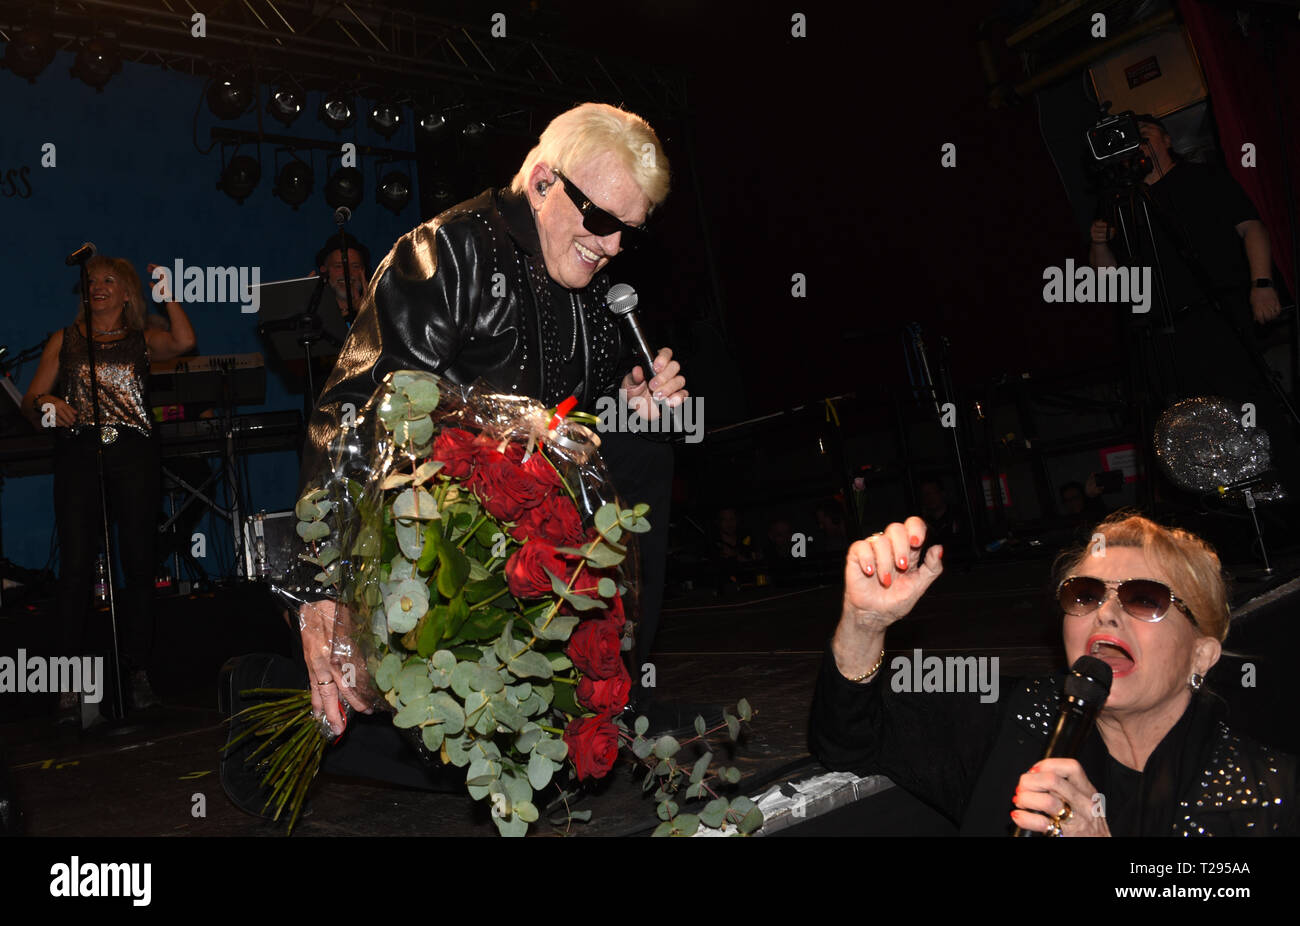 Cologne, Germany. 30th March 2019.  The singer Heino kneels on his farewell tour 'und Tschüss' (and bye) He was presented with a bouquet of red roses by his wife Hannelore at his last concert in Germany, in the 'Live Music Hall' with a microphone on stage. Photo: Horst Ossinger//dpa Credit: dpa picture alliance/Alamy Live News Stock Photo